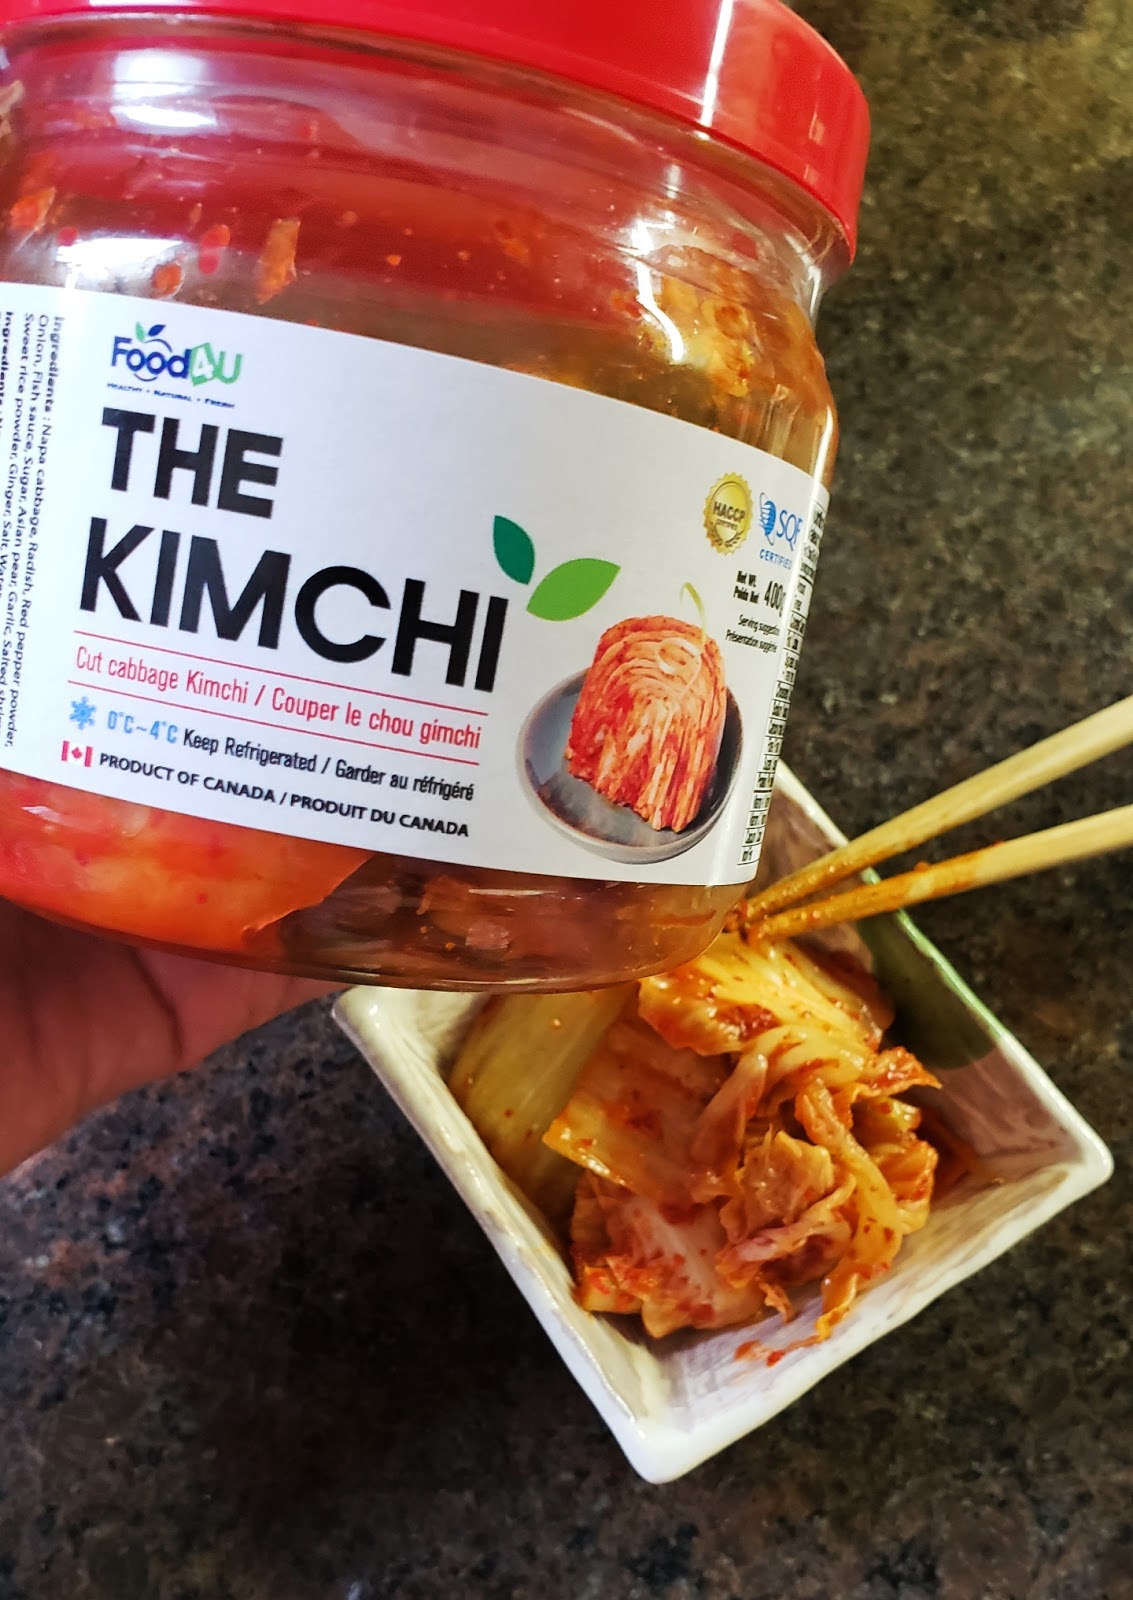 Food 4 U Kimchi created for those trying kimchi for the first time. 